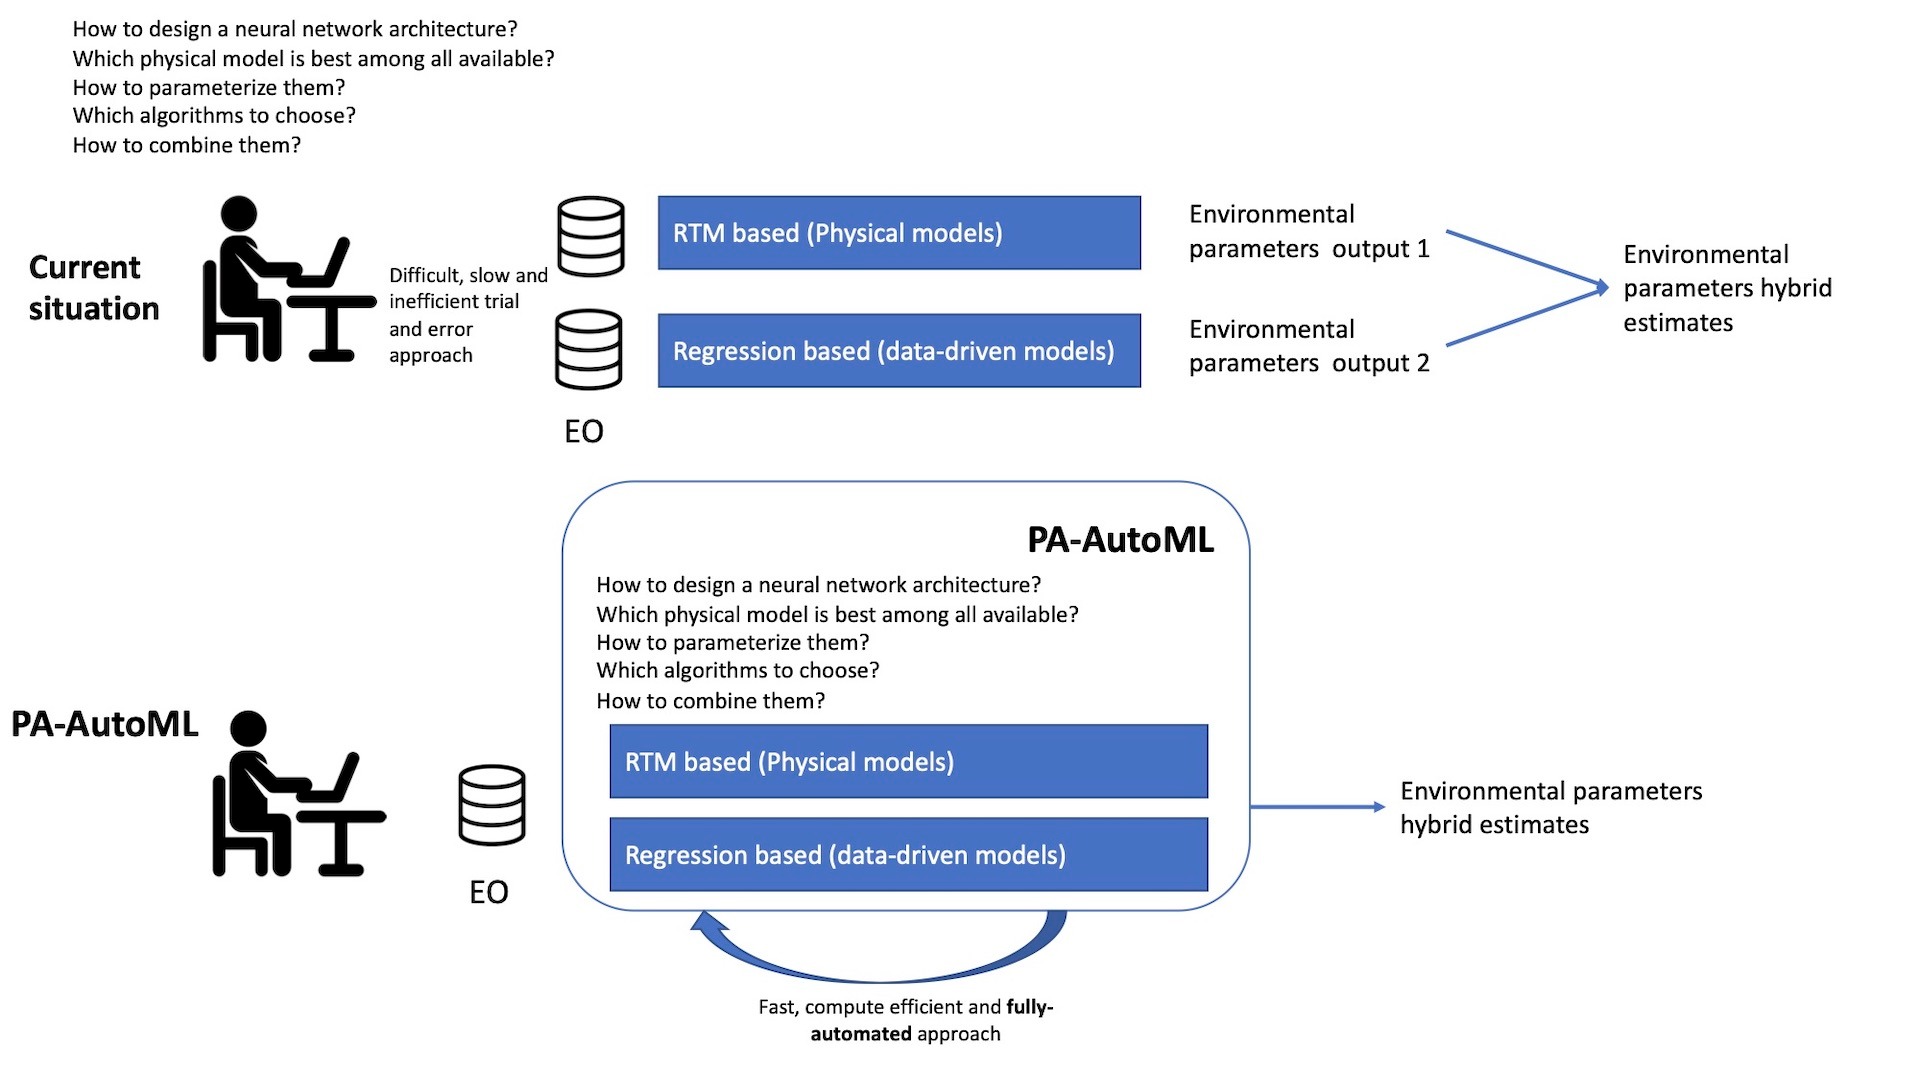 Physics-aware Automated Machine Learning (PA-AutoML) for Earth Observations